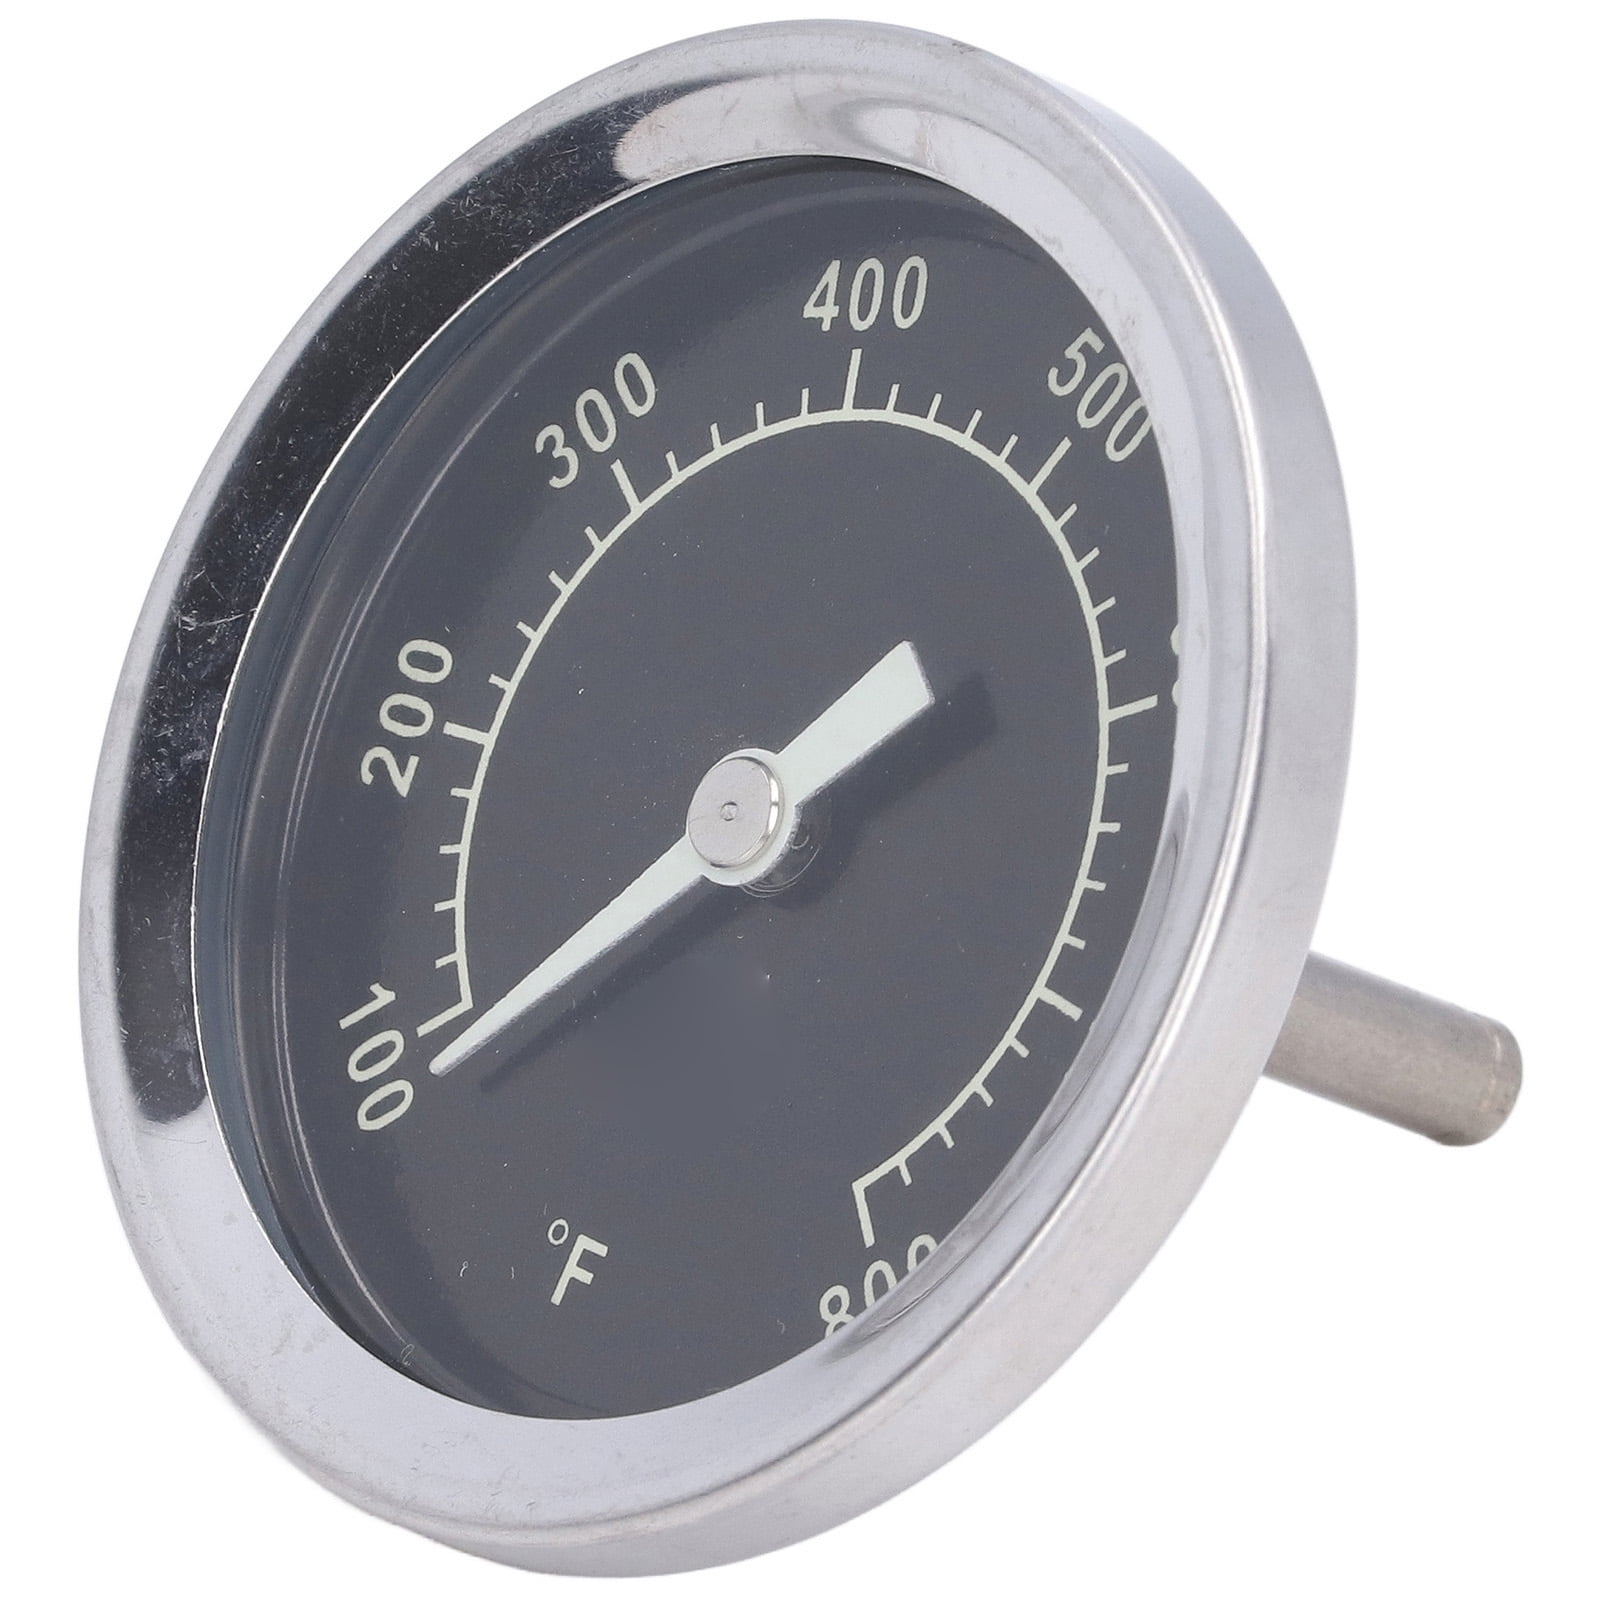 Oven Thermometer Stainless Steel Classic Food Meat Temperature Gauge 100-800℉ 